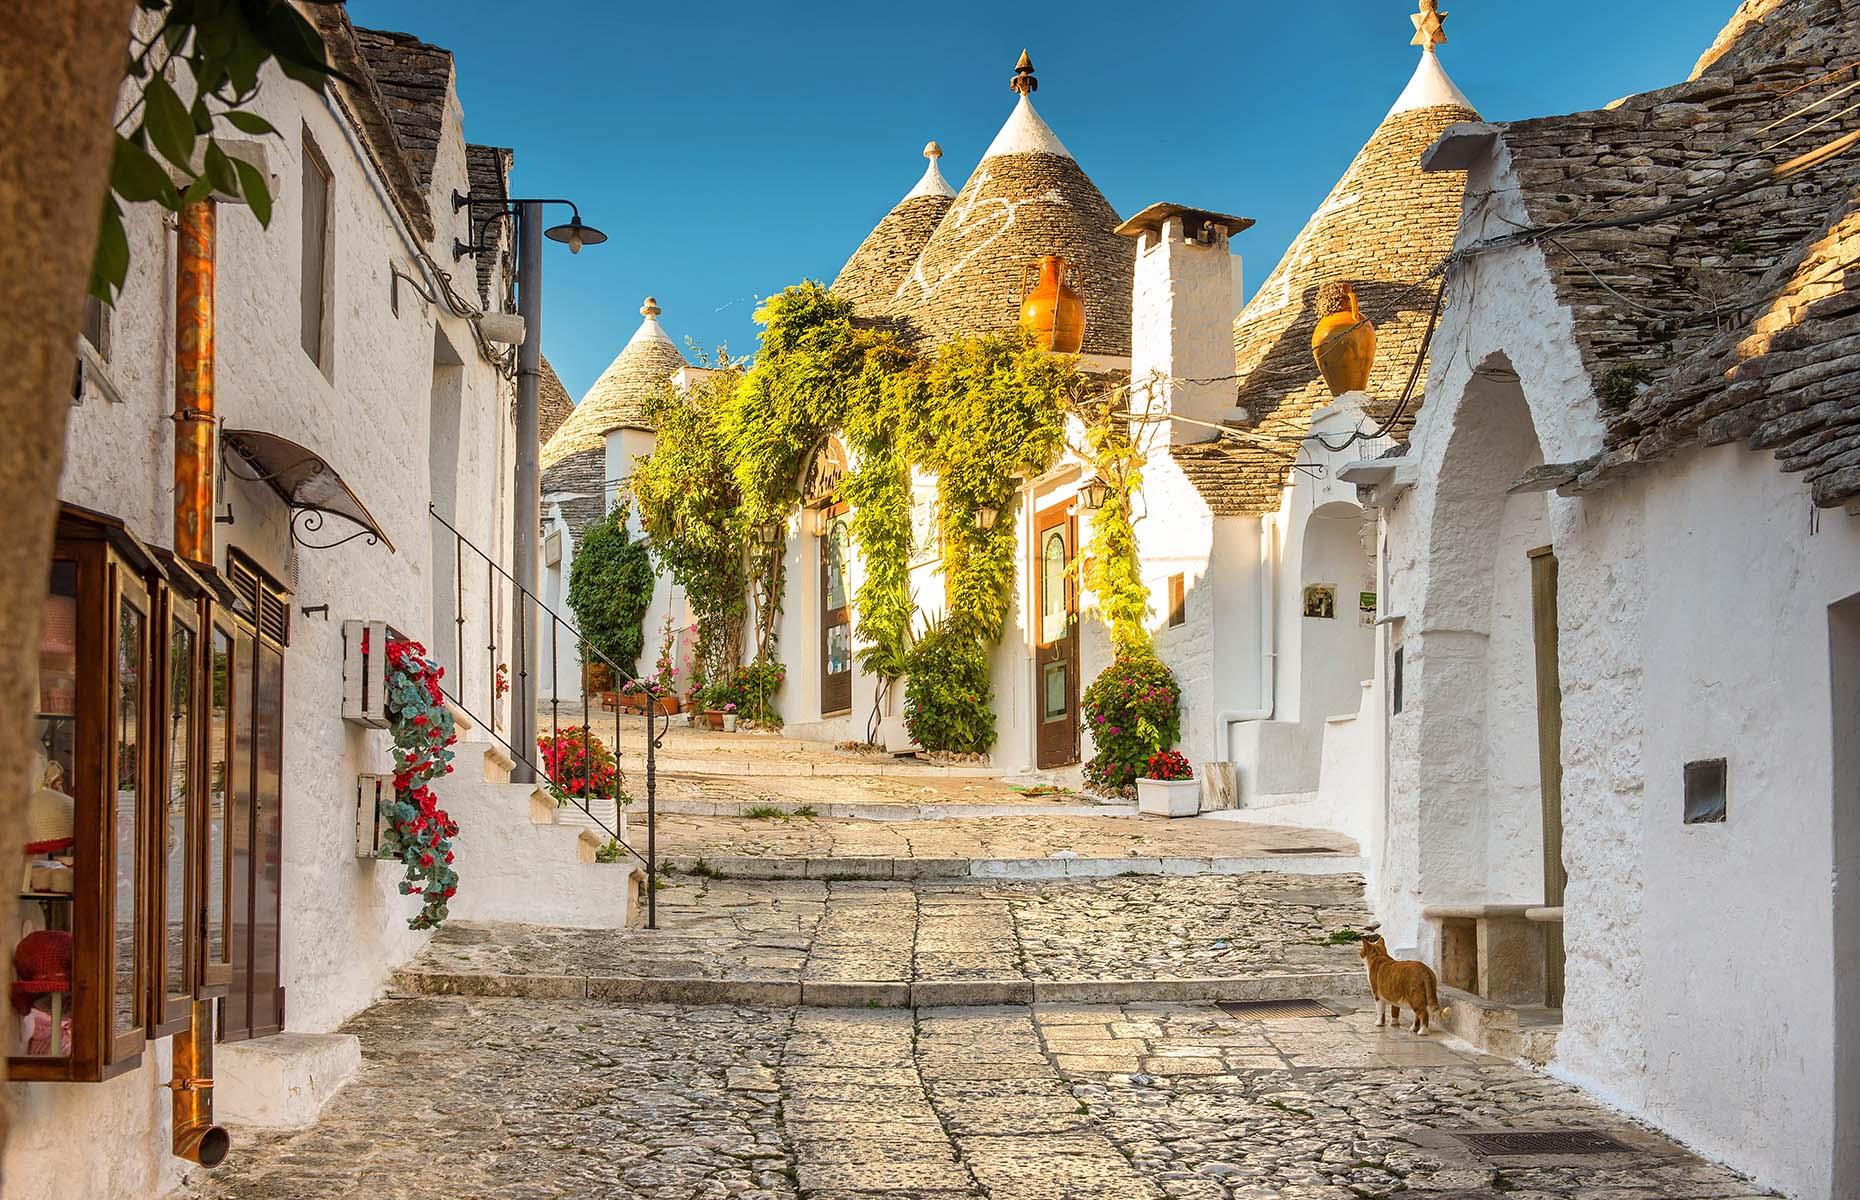 It's almost impossible not to find a picture-perfect street in Alberobello, an UNESCO World Heritage Site in its entirety. The small town in Italy's heel – Puglia – is famous for its unusual trulli homes, built from local whitewashed limestone and with conical roofs. The steps up to Piazza del Popolo reveals stunning views over the higgledy-piggledy town, with thousands of cone-shaped roofs piercing the typically blue sky above.